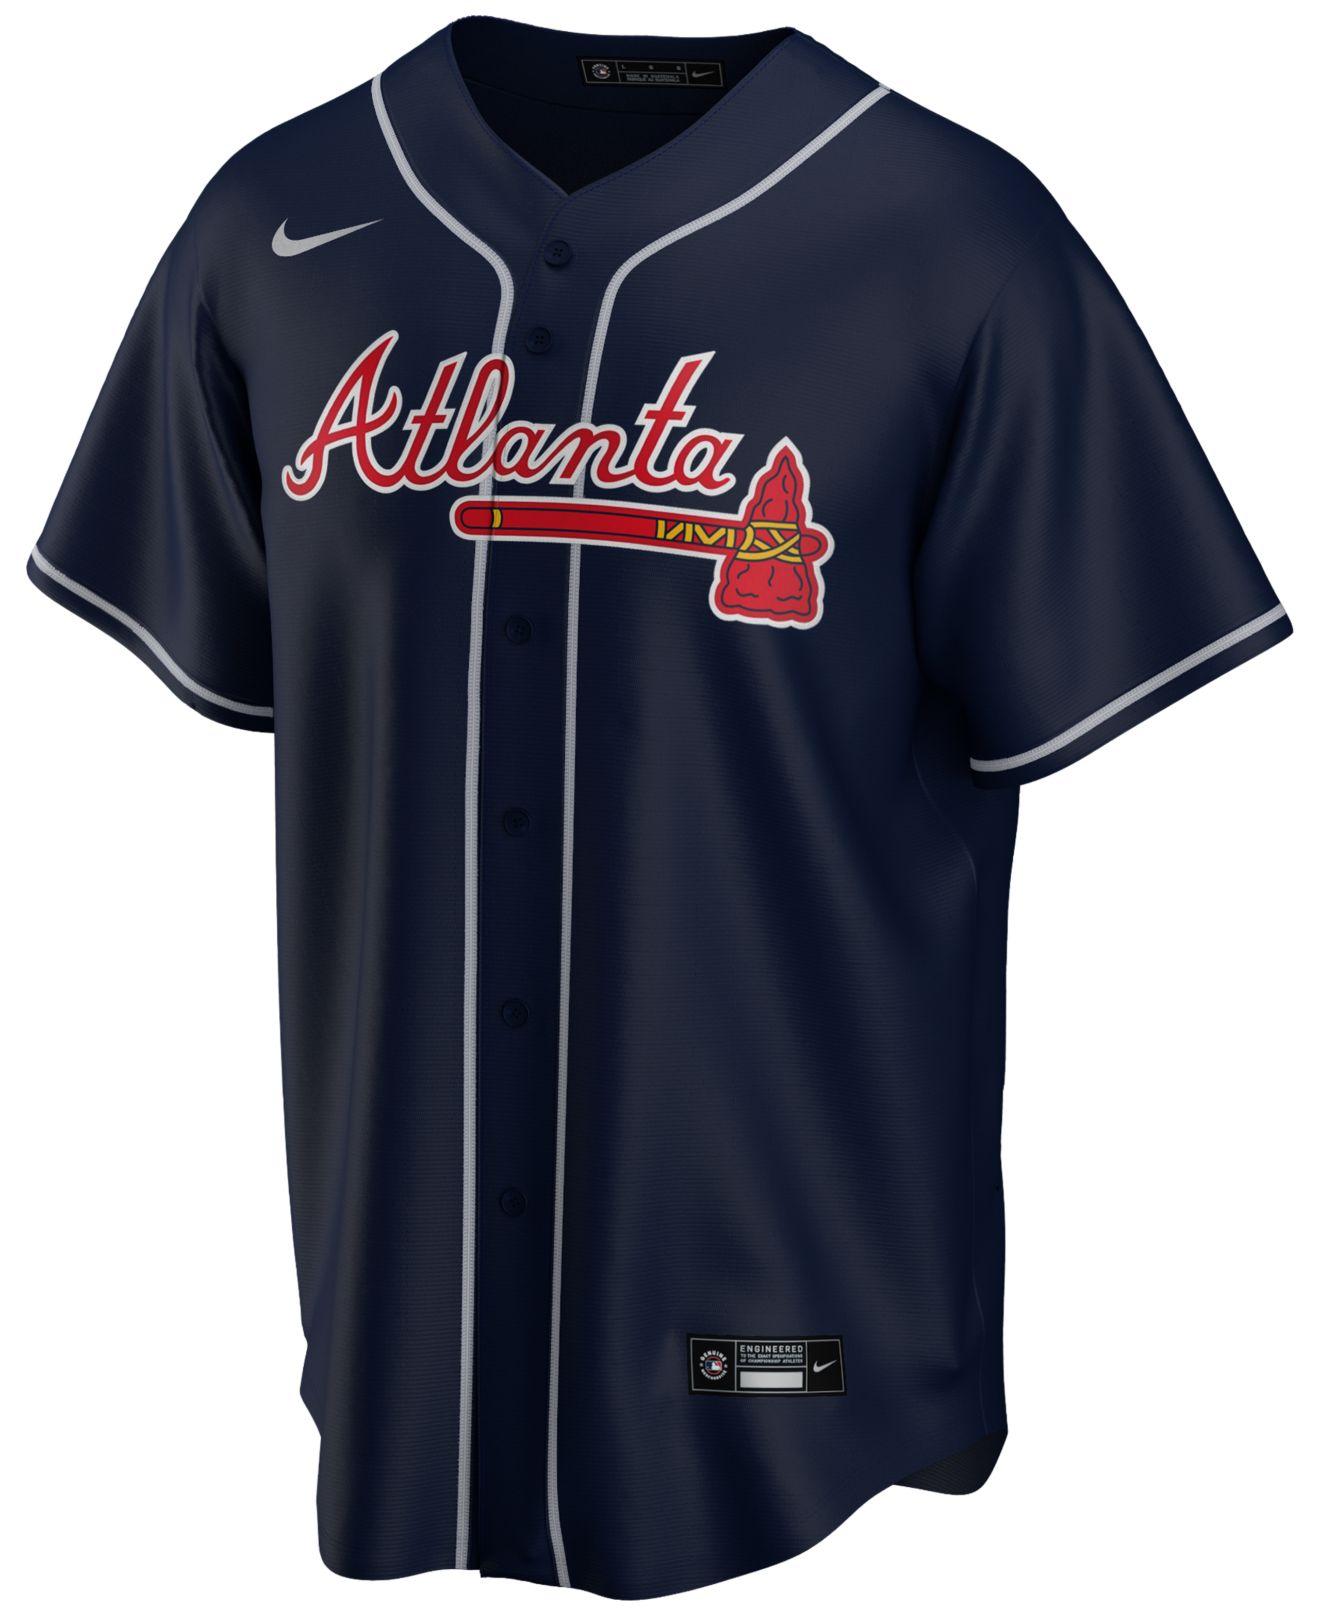 Nike Synthetic Ronald Acuna Atlanta Braves Official Player Replica